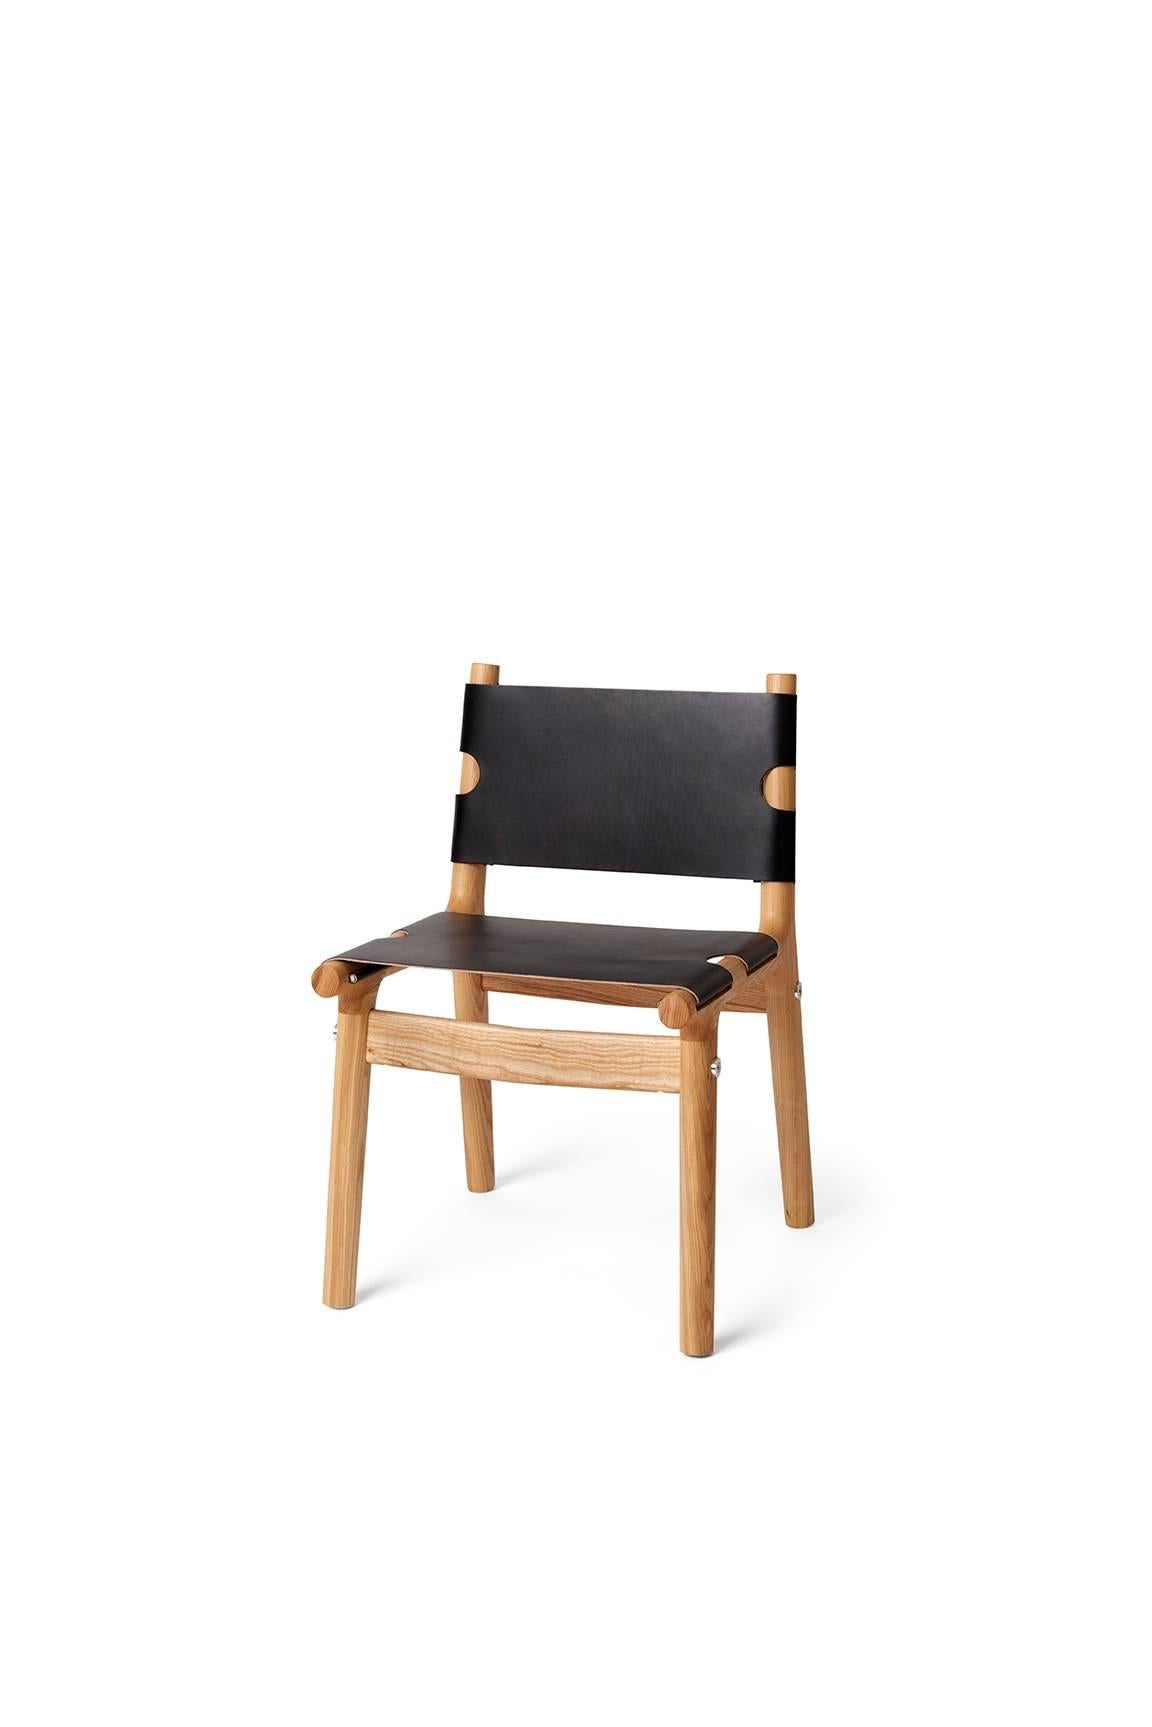 American 204 Side Chair, Modern Ash Hardwood, Tan Harness Leather, and Polished Aluminium For Sale